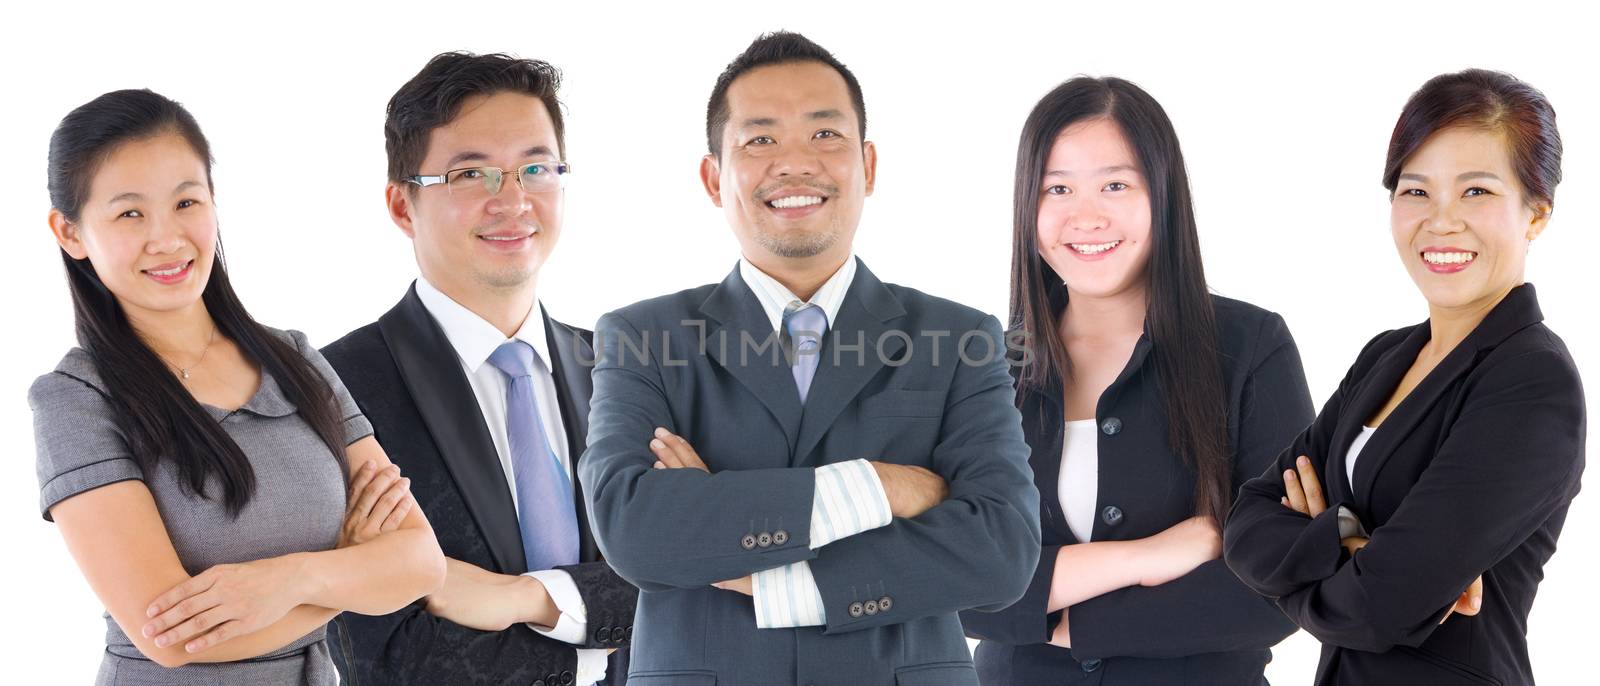 Collage portraits of diverse asian people and mixed age group of focused business professionals.Concept of financial, insurance and marketing business and  globalization.